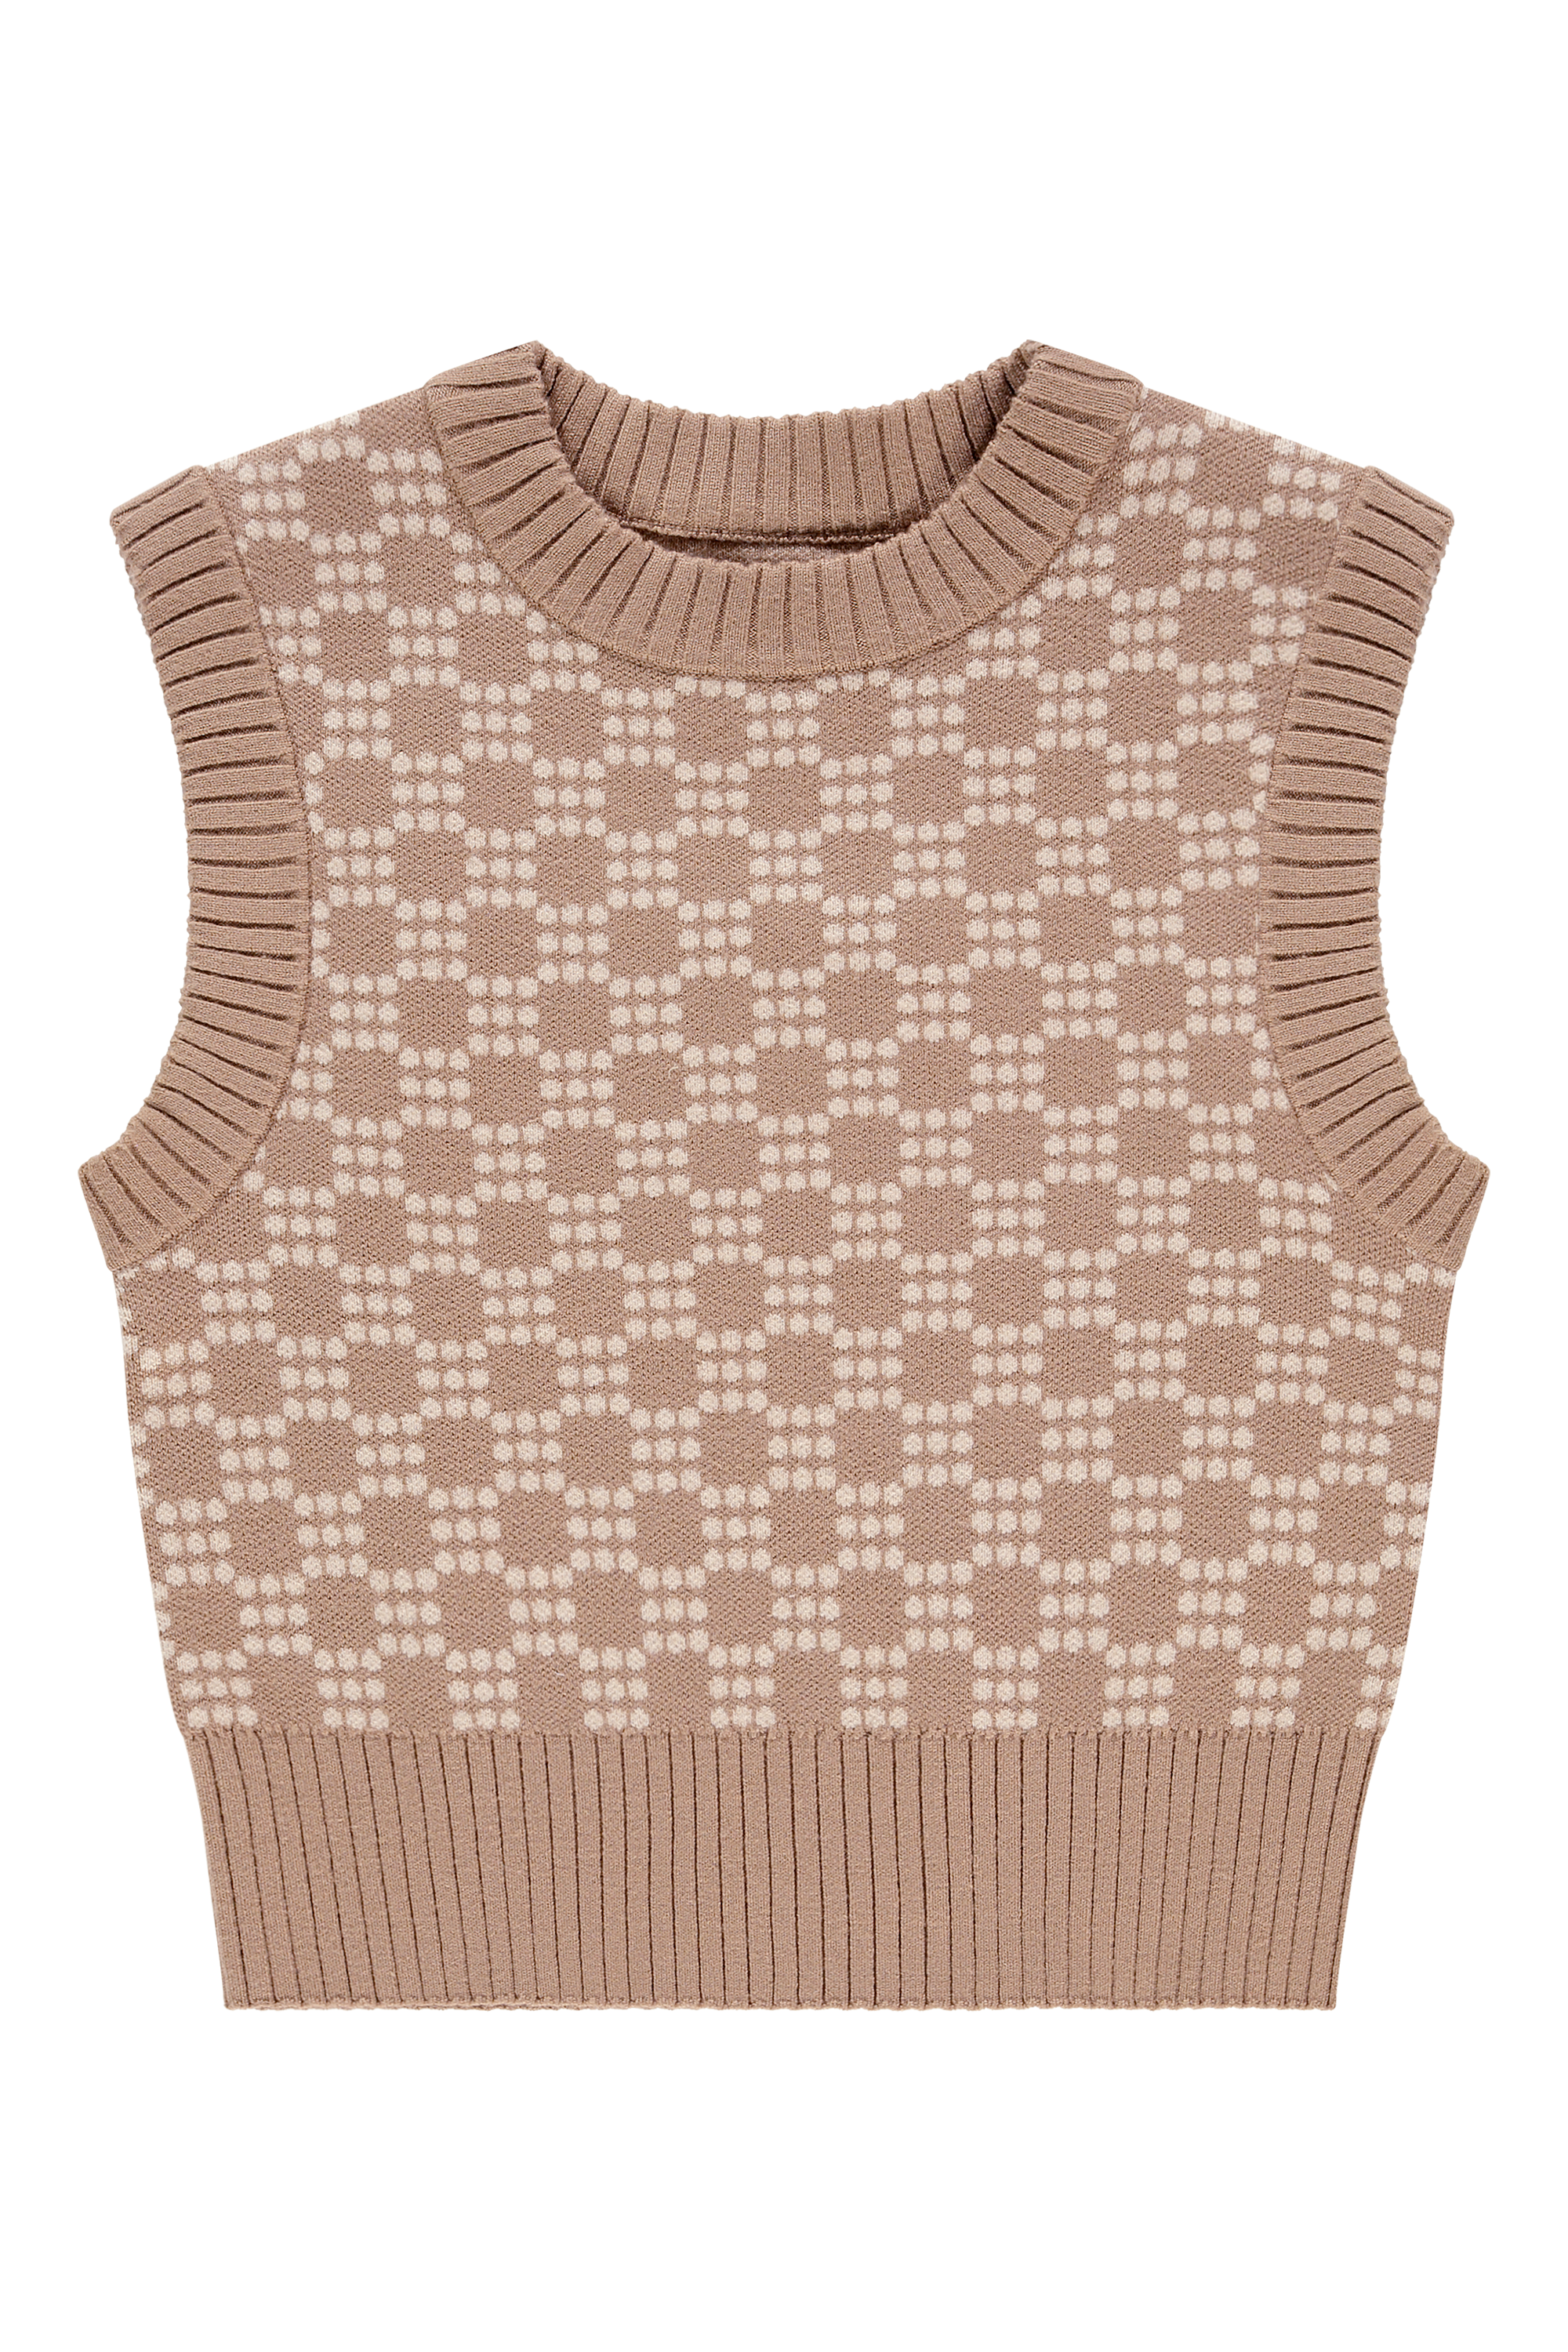 products-top_beige_front_e586f098-215e-438a-819c-137e44f87213-png